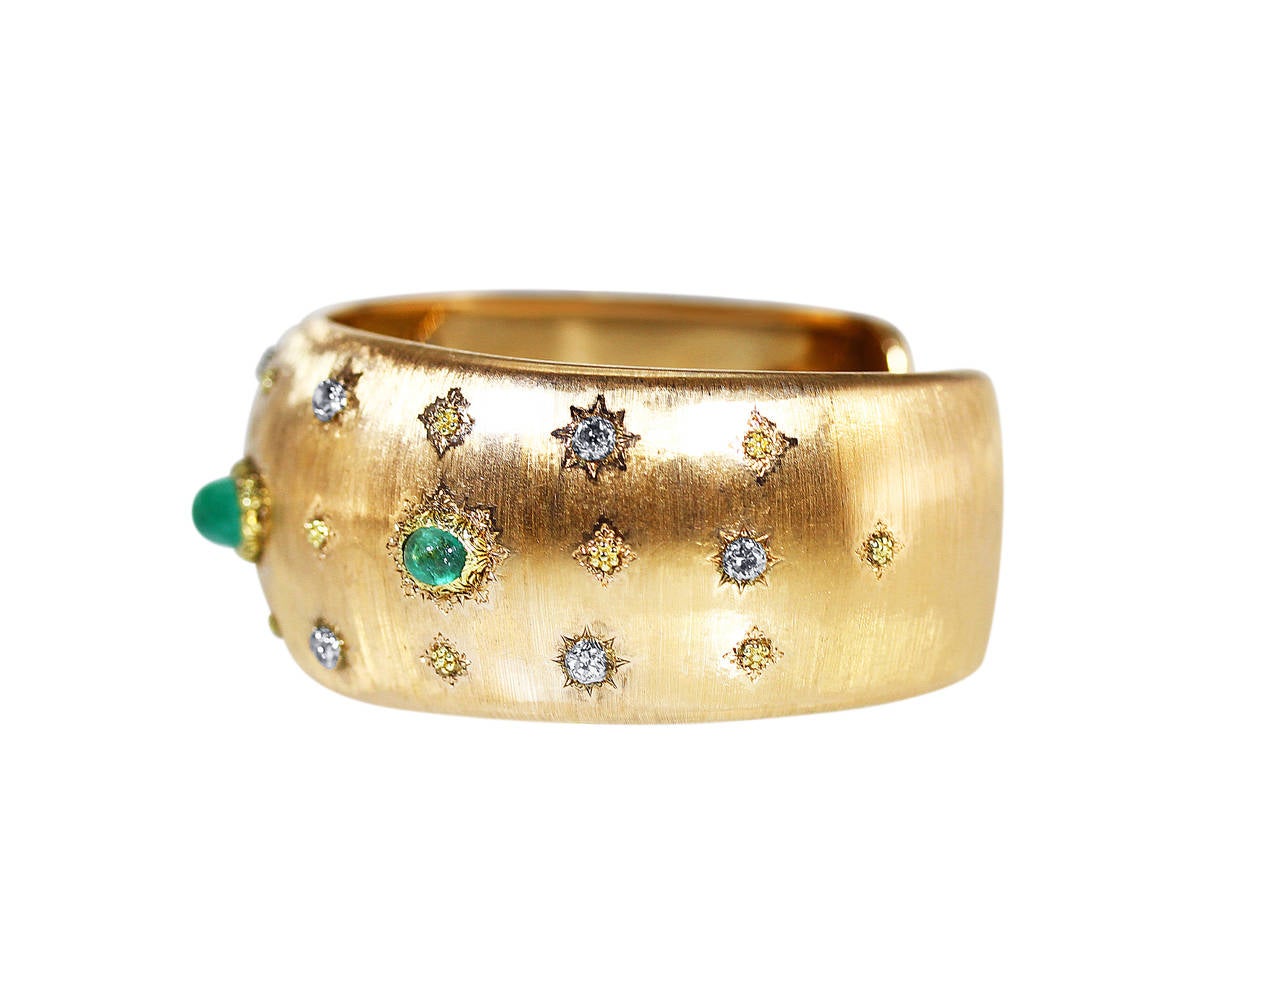 An 18 karat yellow gold, cabochon emerald and diamond cuff bracelet by Buccellati, Italy, of slightly tapered form with brushed gold detailing set with 3 cabochon emeralds weighing approximately 3.00 carats, accented by 10 single-cut diamonds